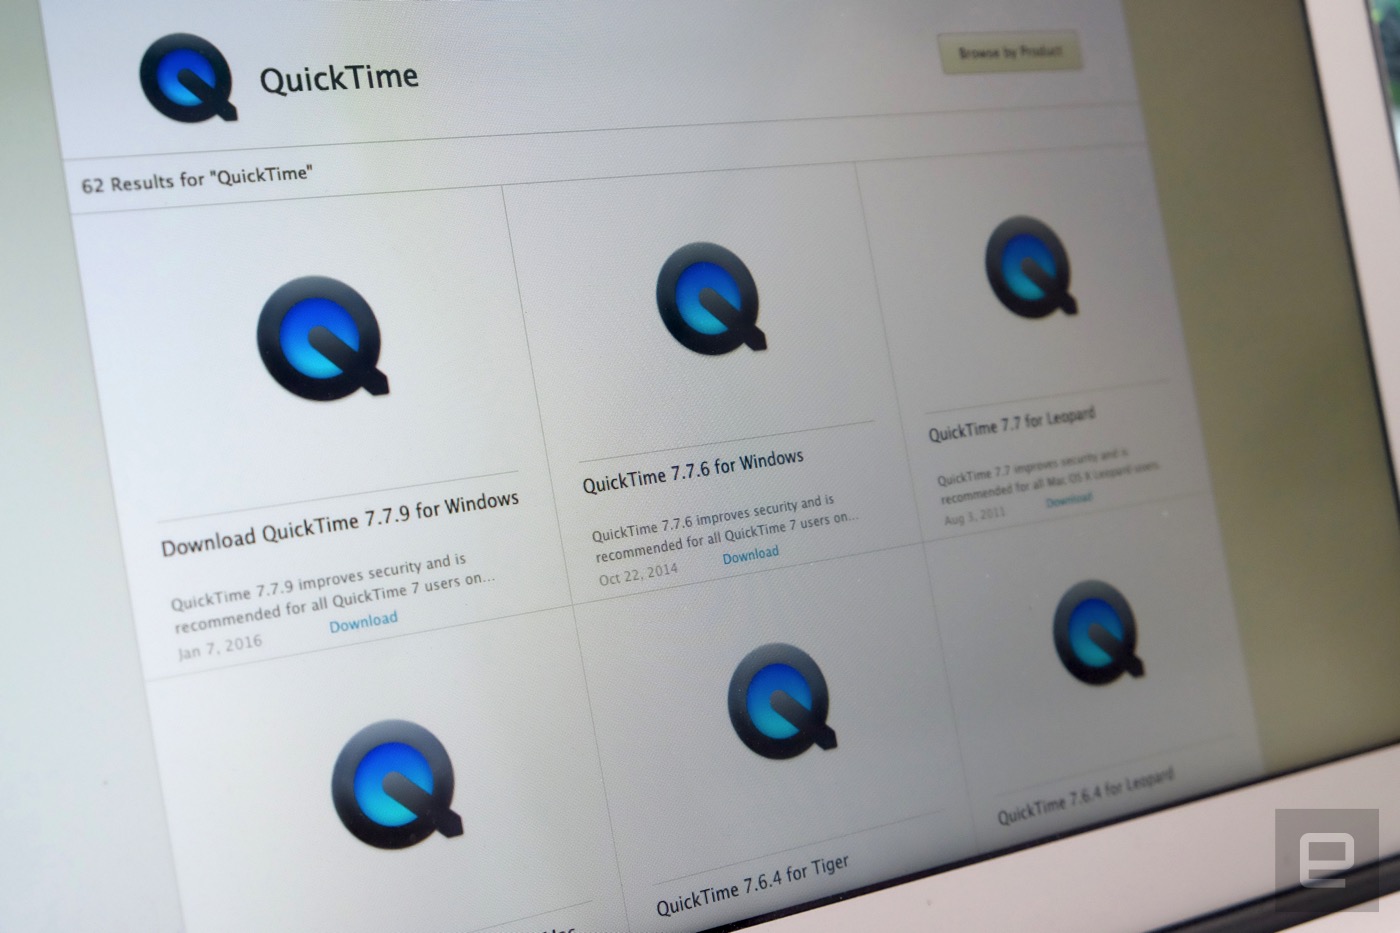 Apple confirms that it is no longer supporting Quicktime for Windows